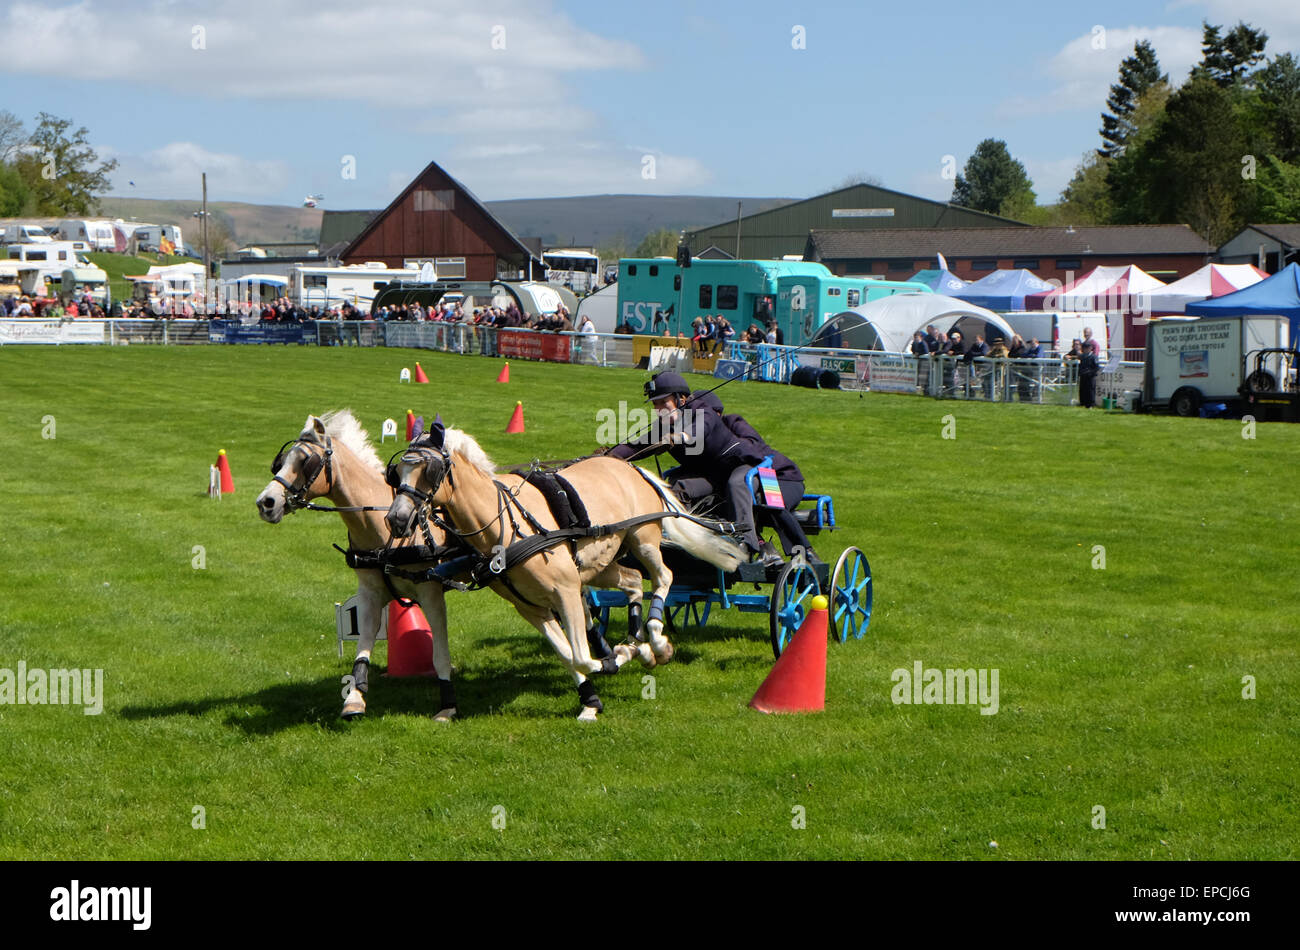 Royal Welsh Spring Festival Builth Wells, Powys, Wales, UK May, 2015. Day 1 of the festival included the preliminary rounds of the Scurry Driving competition with teams of two racing around the outdoor showground in the afternoon sunshine. Stock Photo